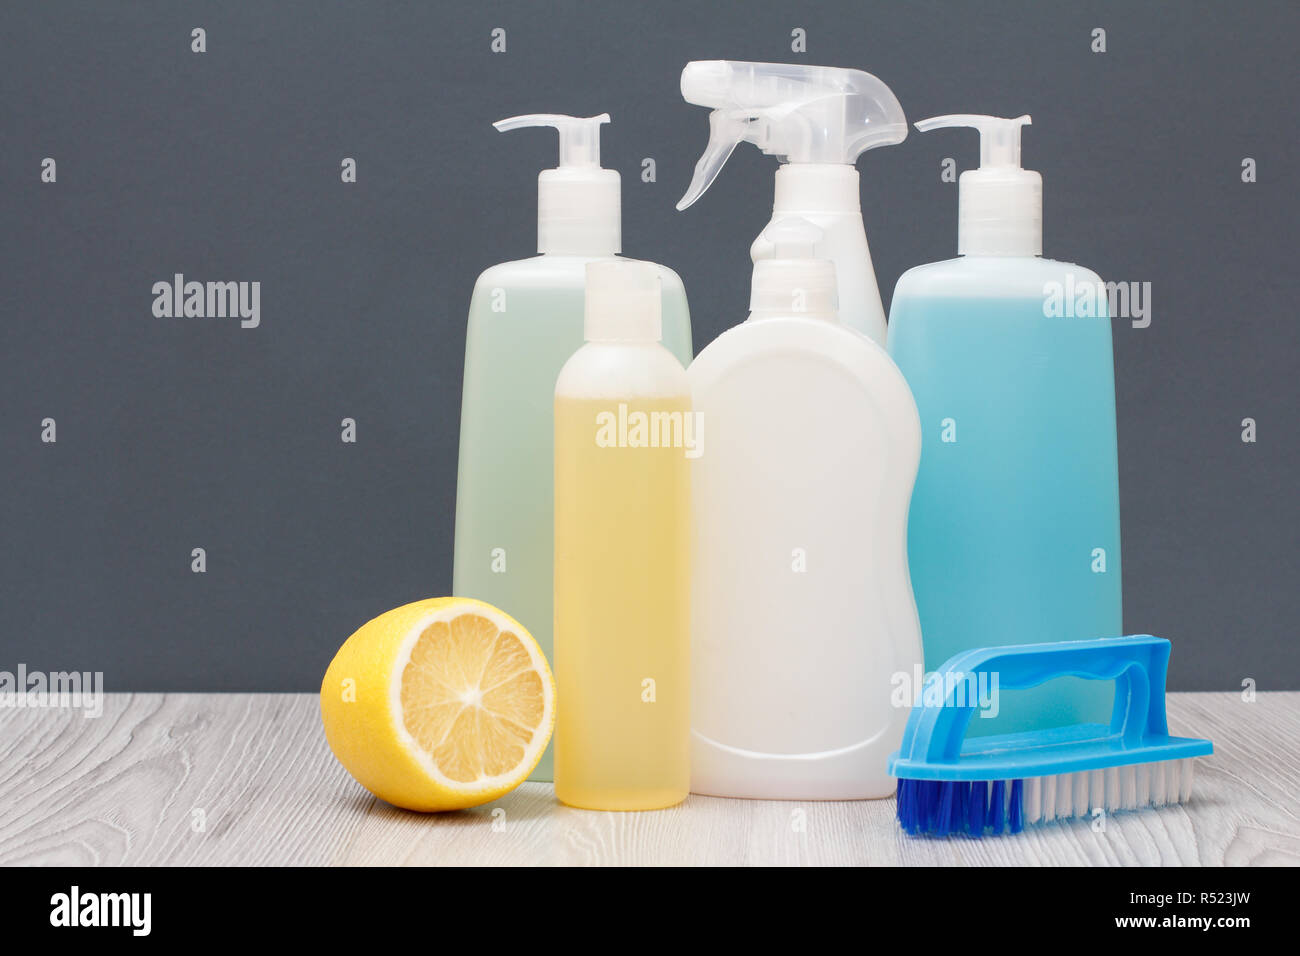 Plastic bottles of dishwashing liquid, glass and tile cleaner, detergent for microwave ovens and stoves, brushe and lemon on gray background. Stock Photo